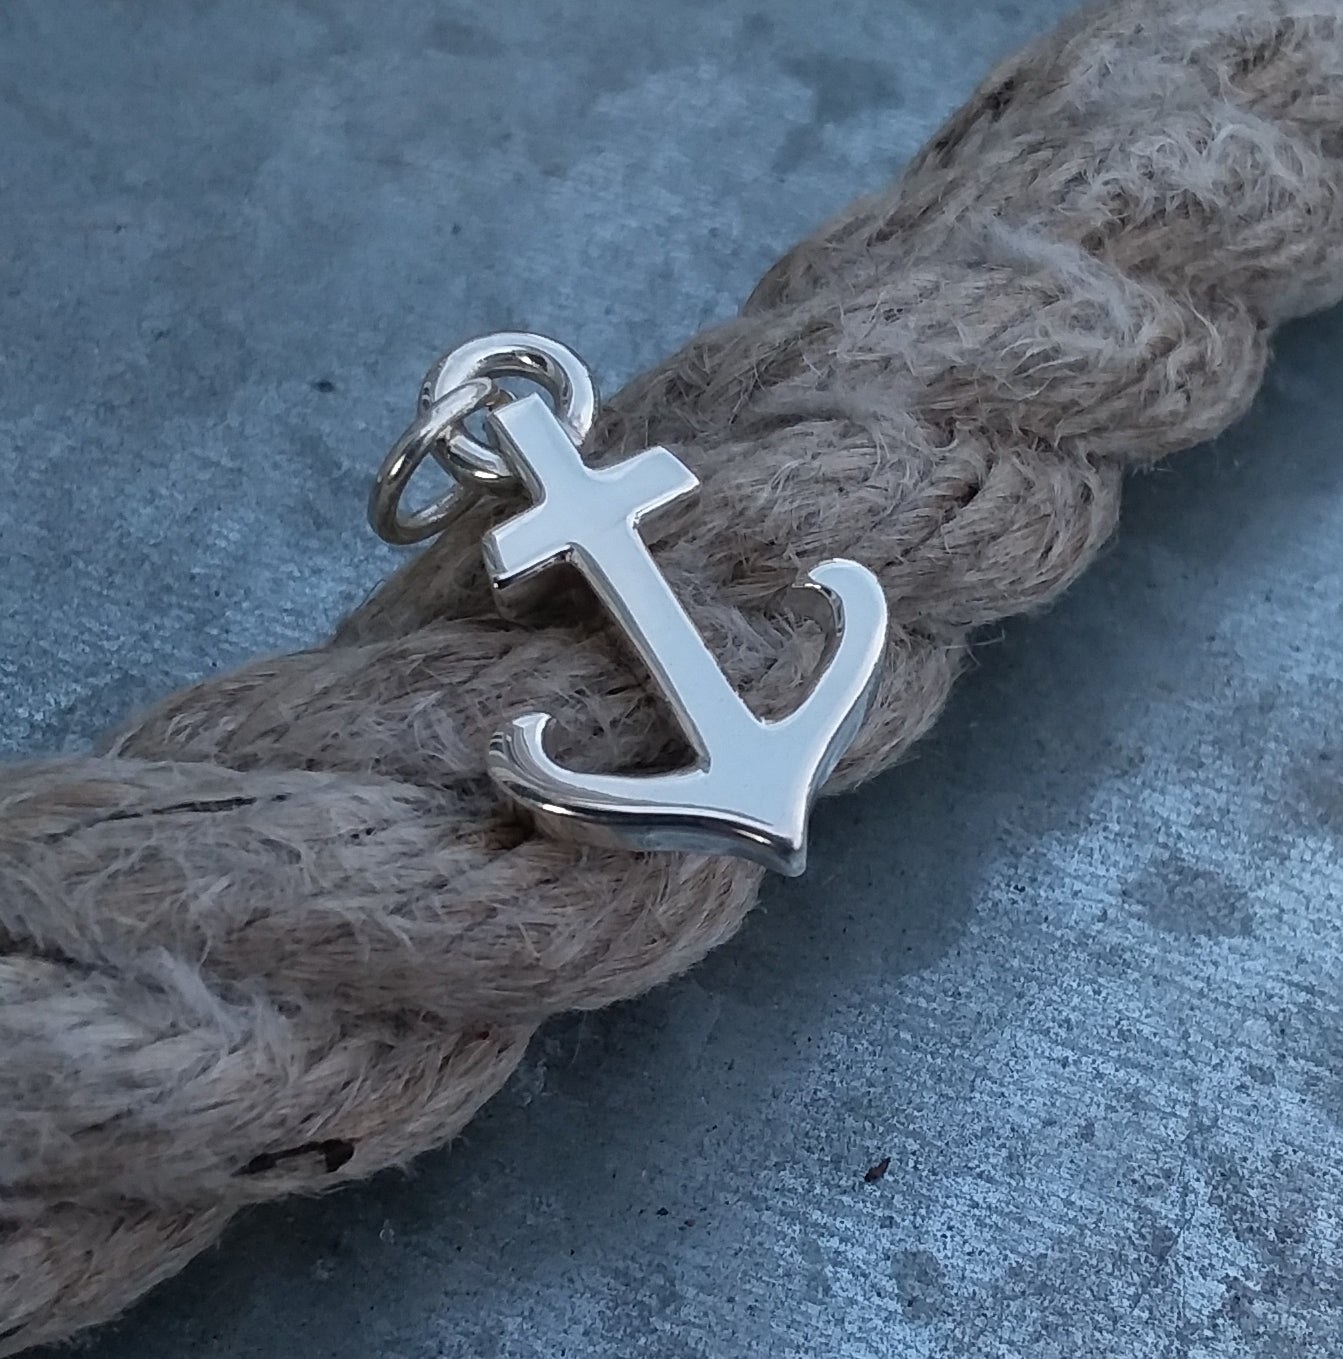 Amazon.com: Anchor cord bracelet, men's bracelet with a silver plated anchor  charm and a gray cord, bracelet for men, gift for him, nautical men jewelry  : Handmade Products